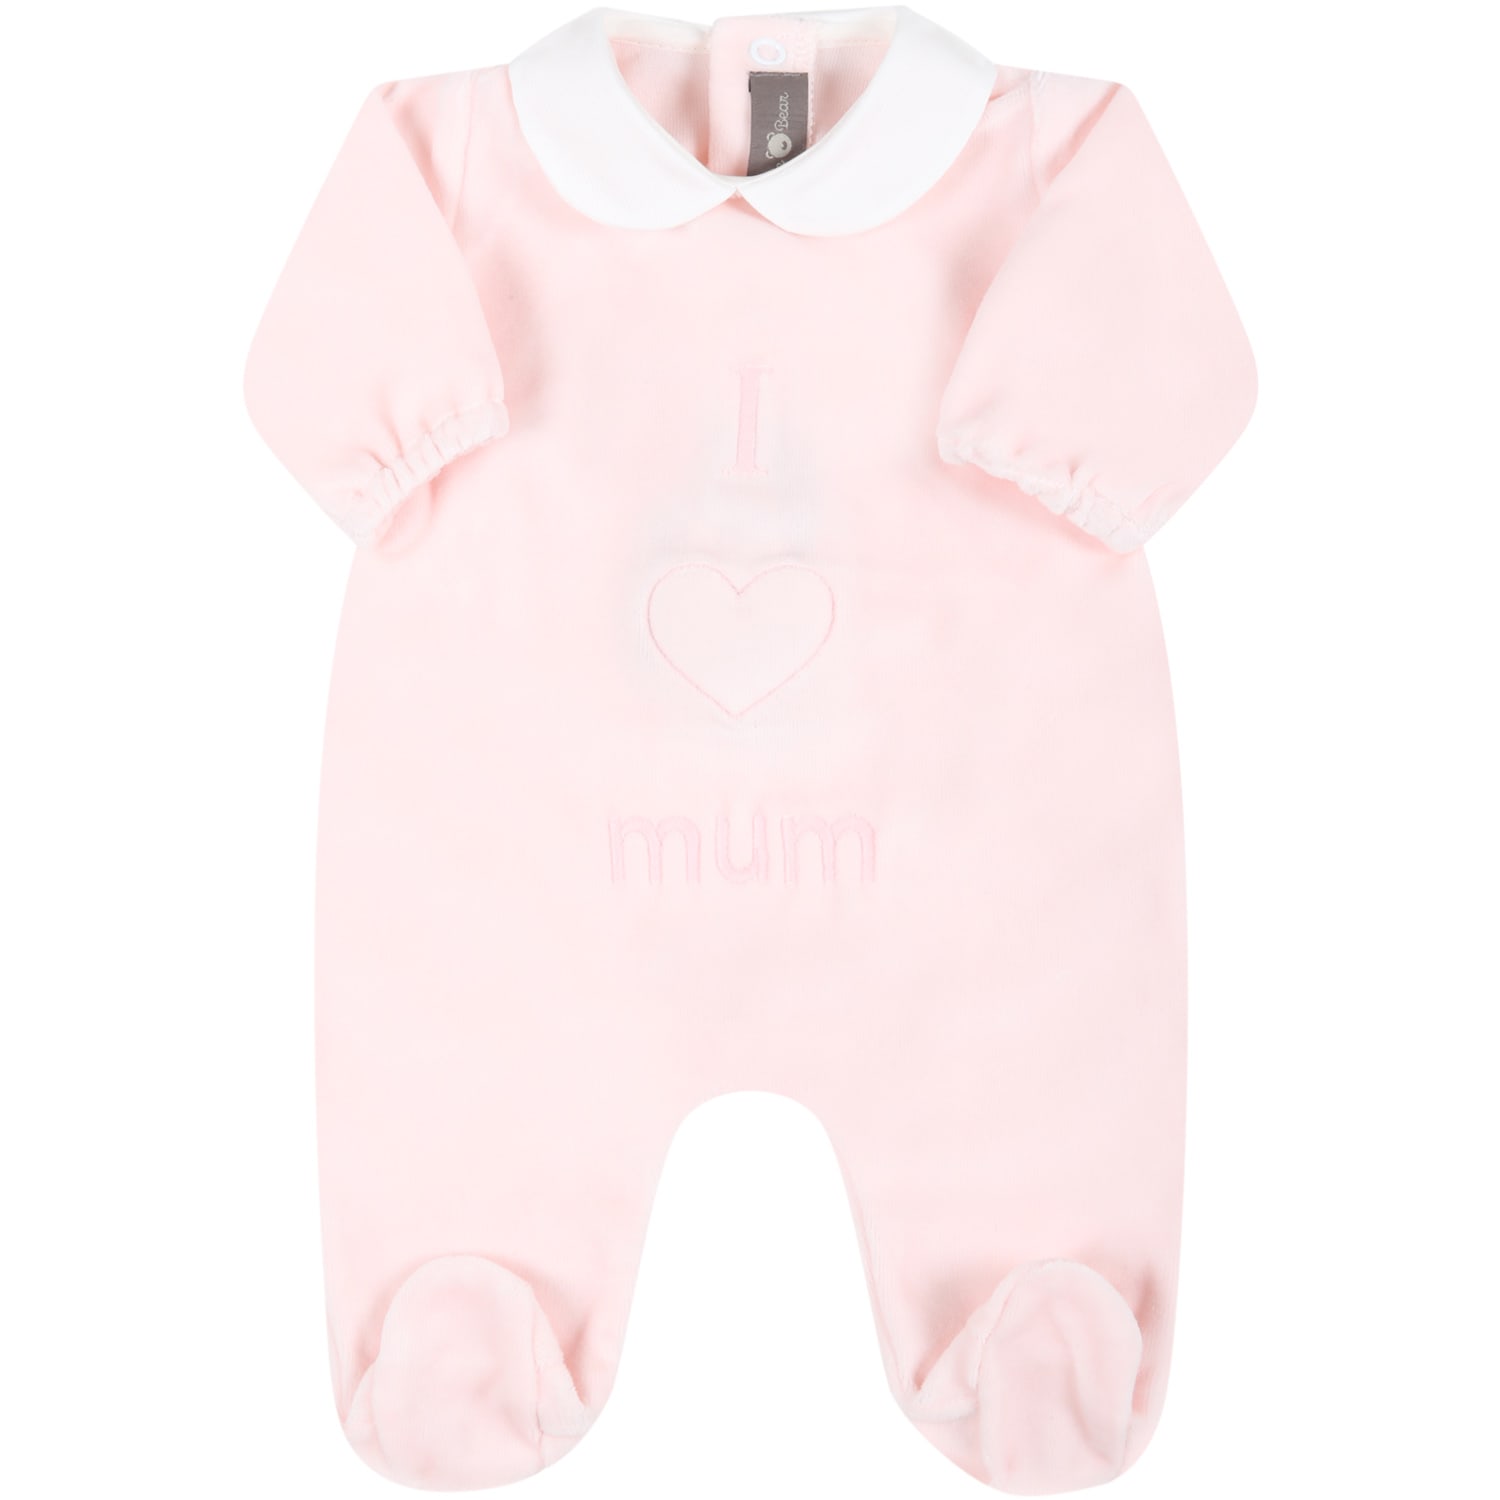 Little Bear Pink Babygrow For Baby Girl With Writing